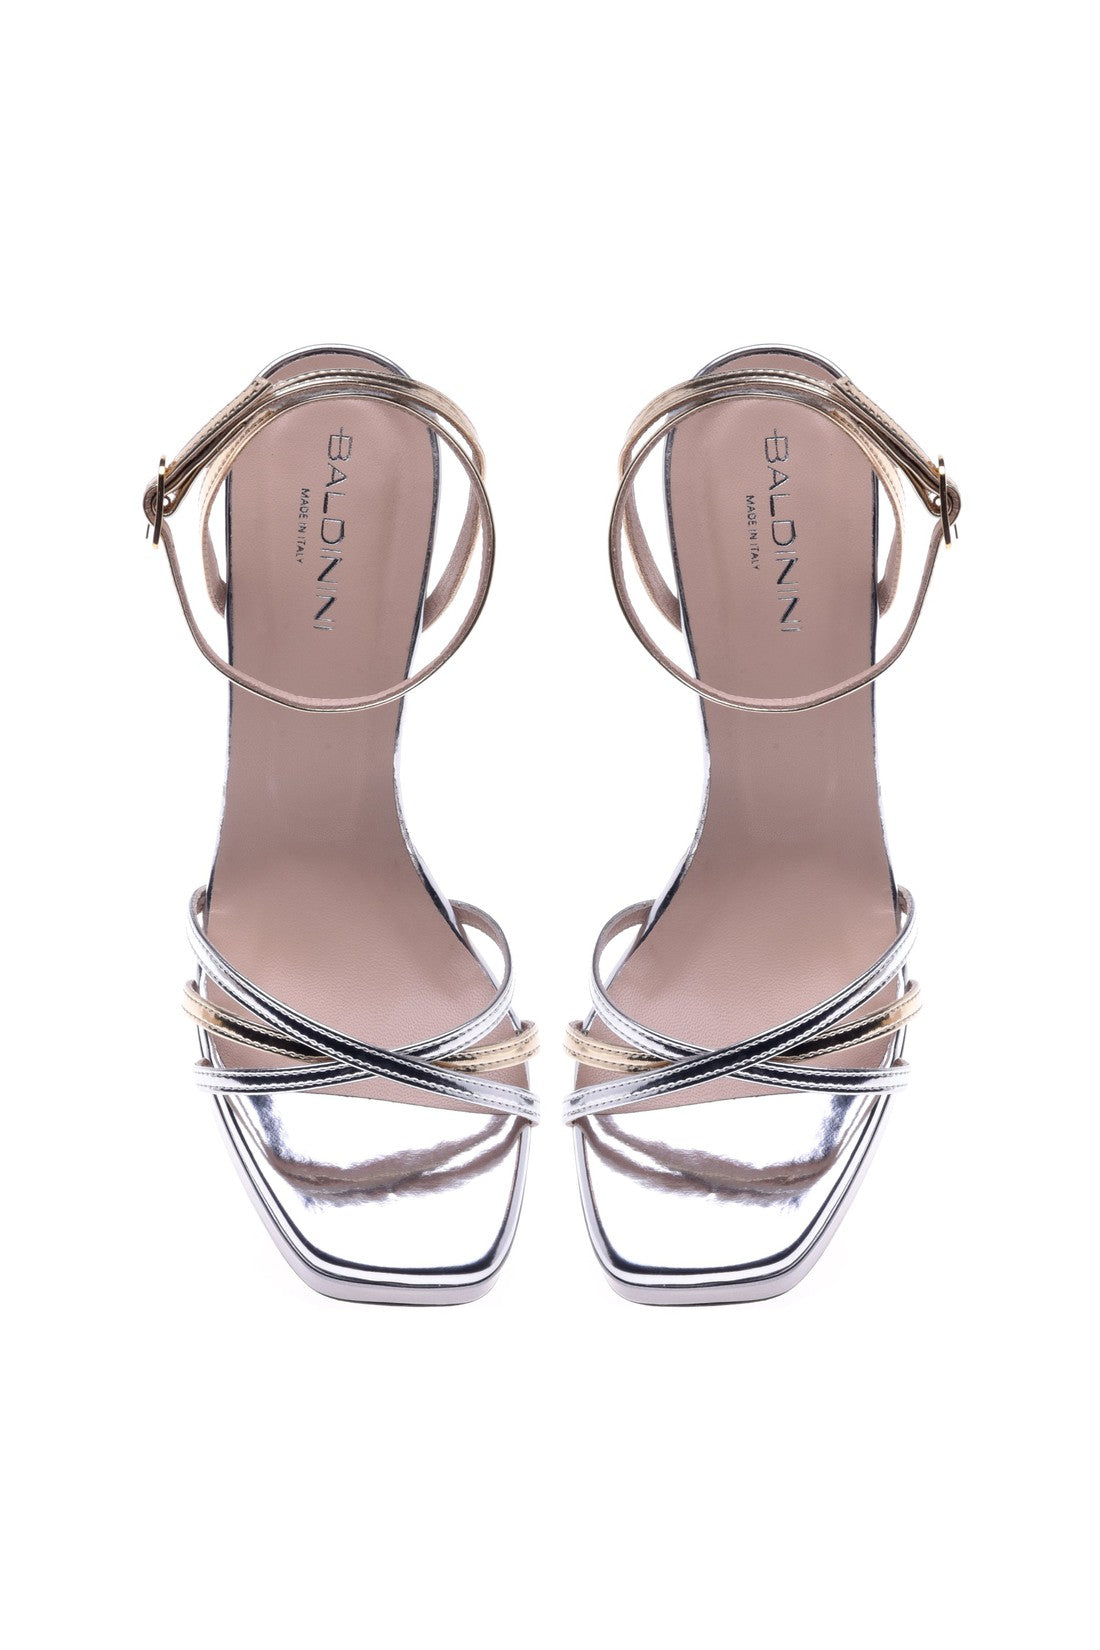 BALDININI-OUTLET-SALE-Sandal-in-silver-and-gold-laminated-calfskin-Sandalen-ARCHIVE-COLLECTION-2.jpg